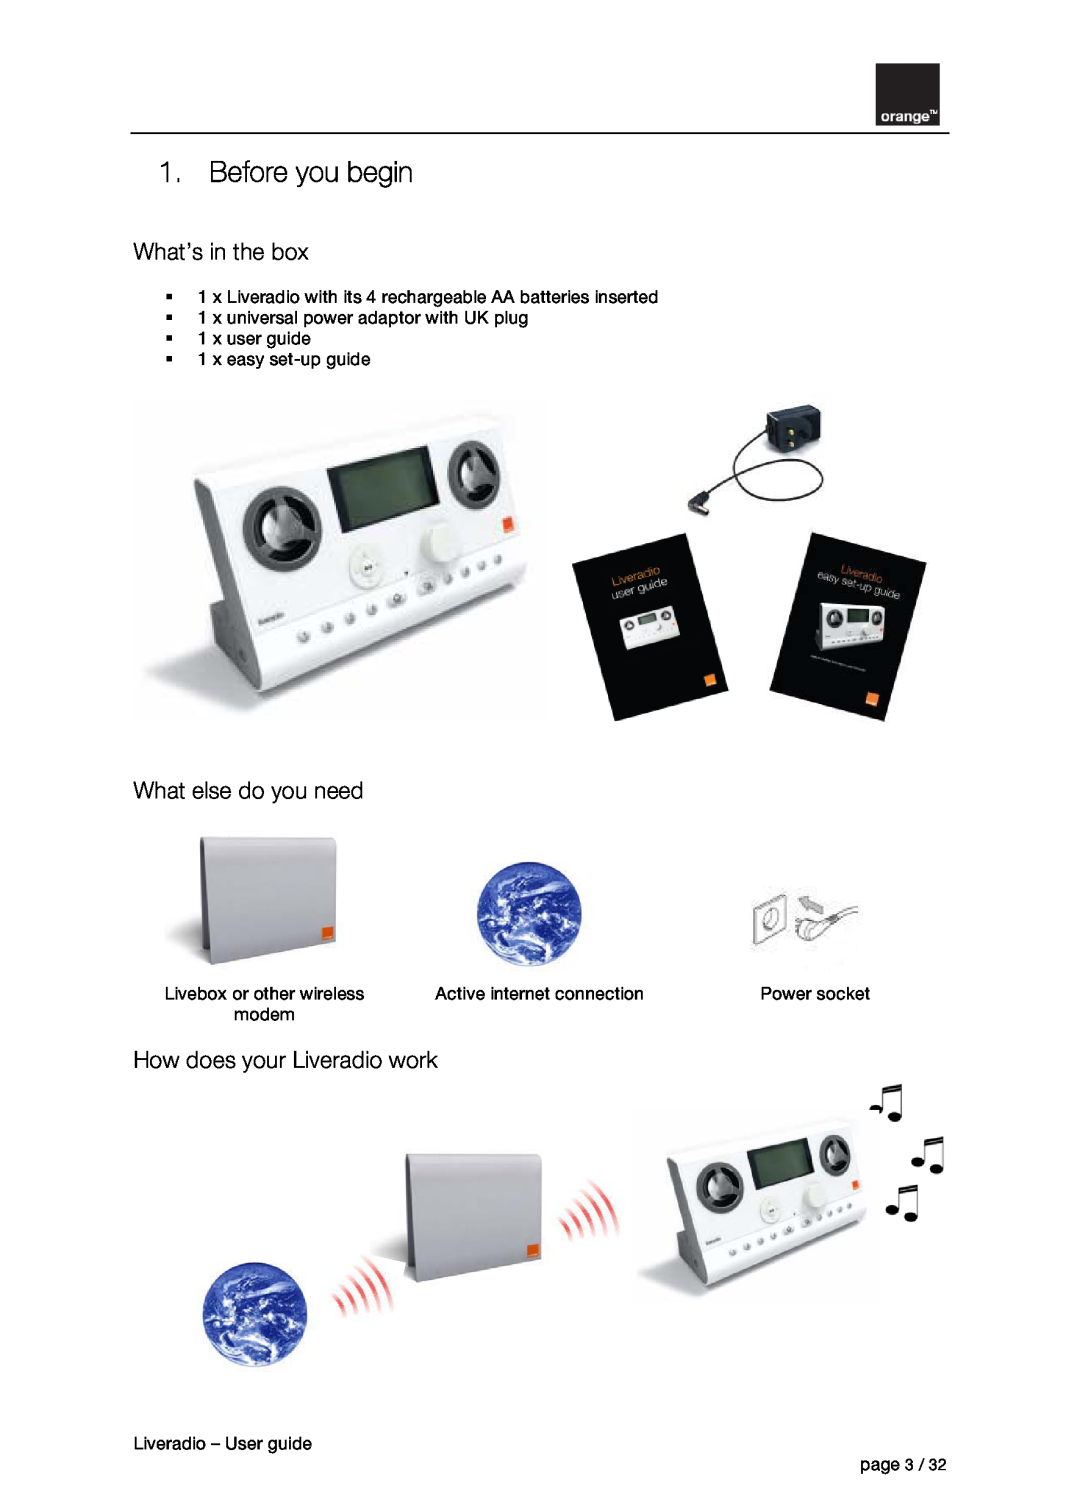 Orange Micro B31100004-B manual Before you begin, What’s in the box, What else do you need, How does your Liveradio work 